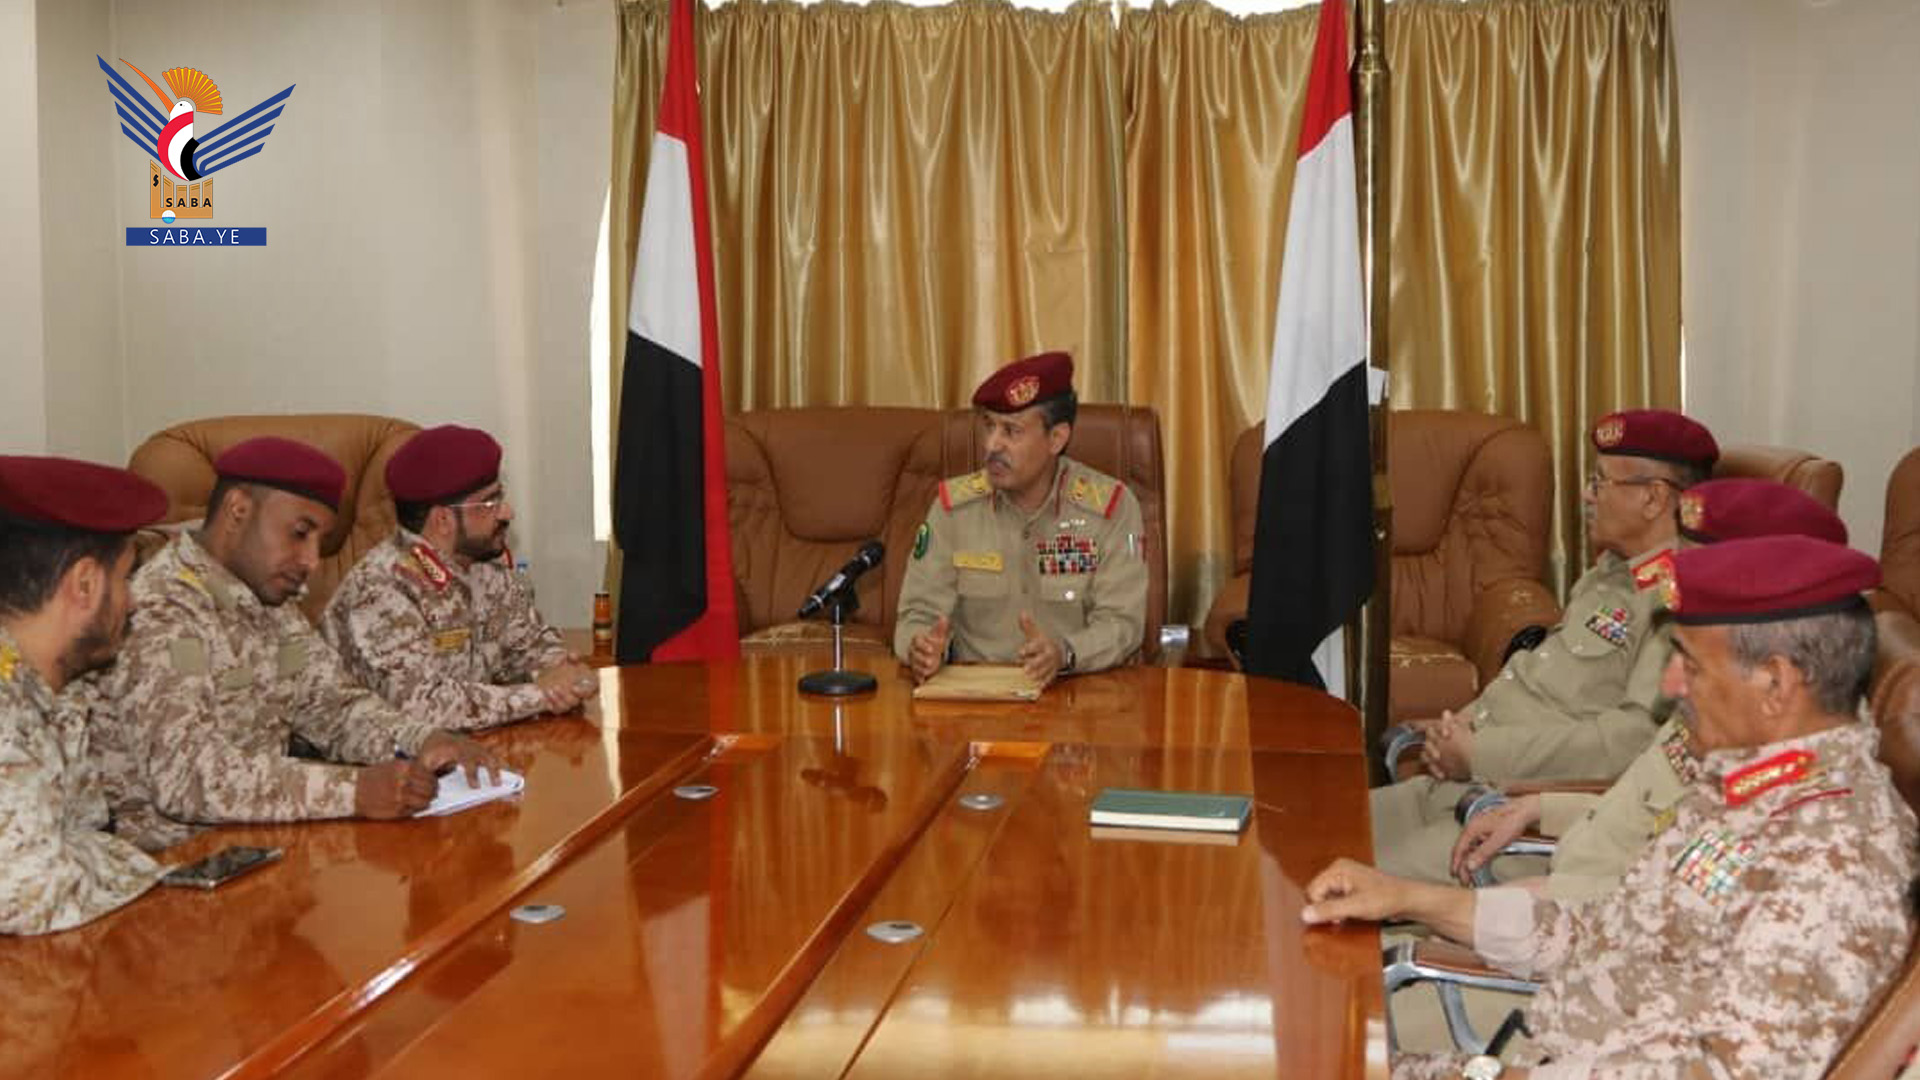 Defense Minister: Sana'a prioritizes security, stability, honorable peace based on equal treatment